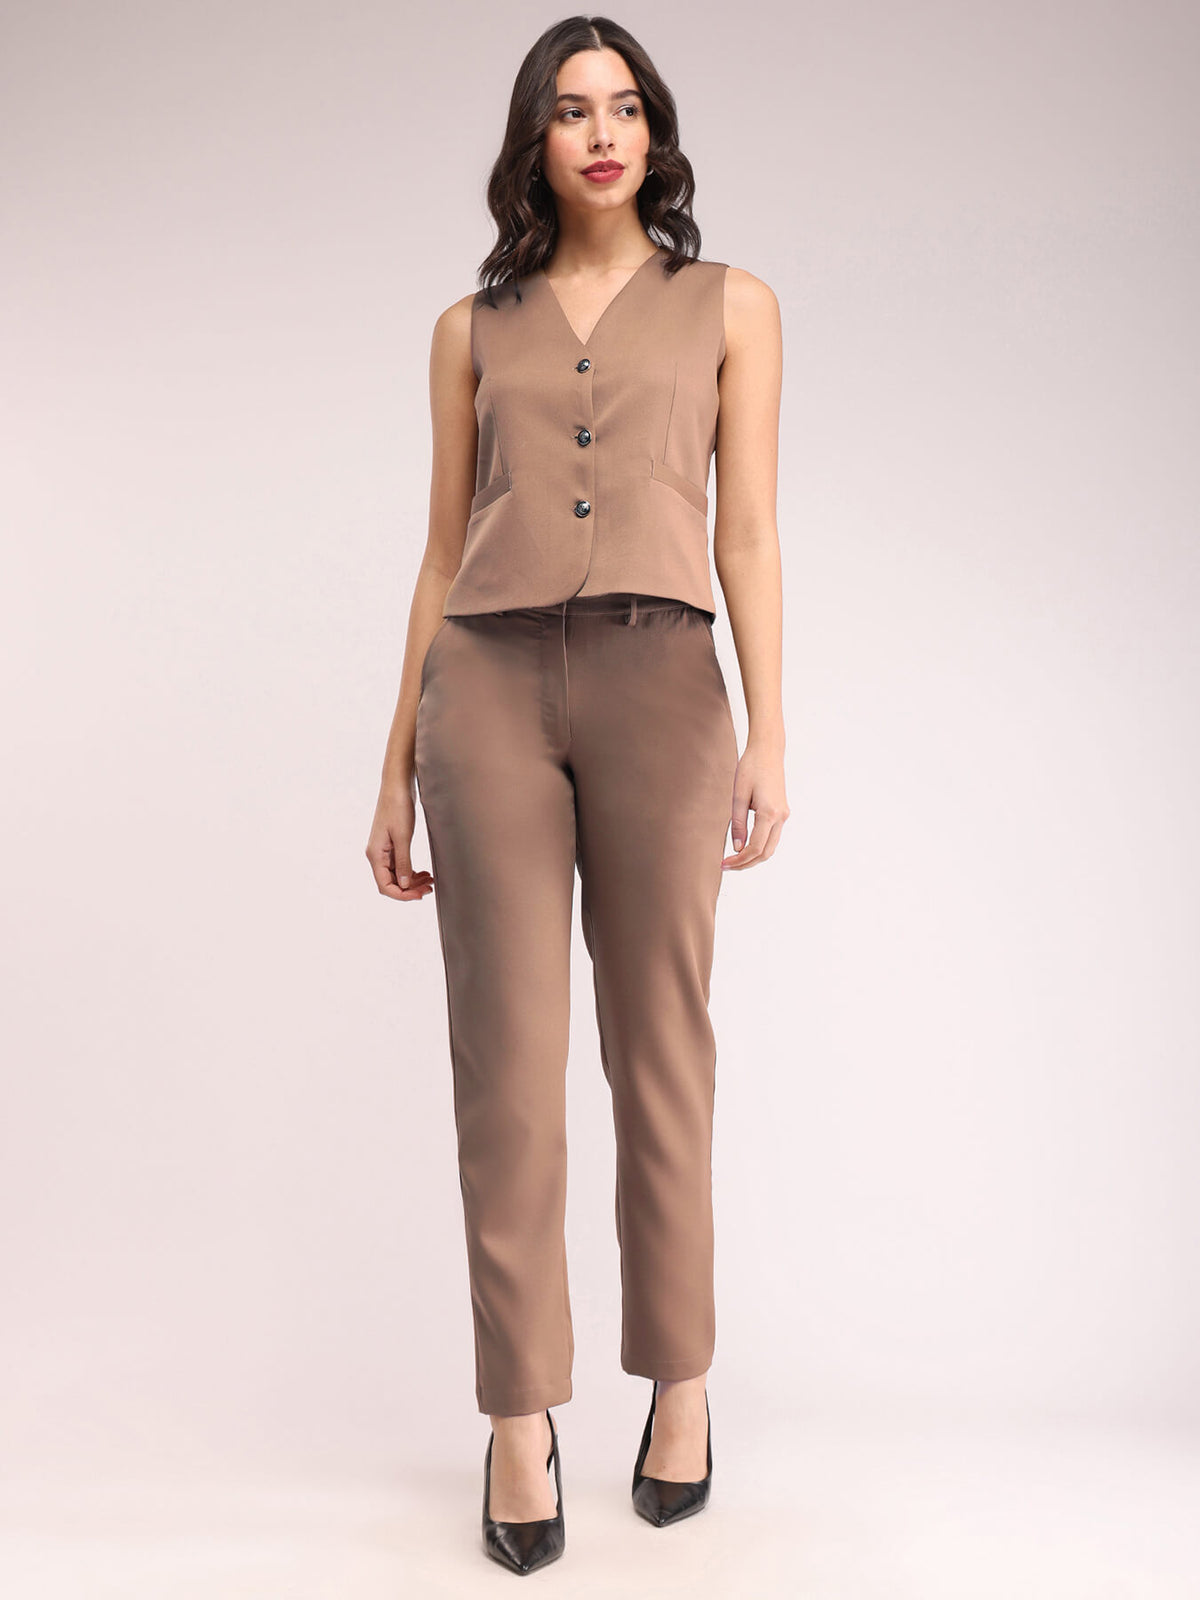 Waistcoat And Trousers Co-ord Set - Brown